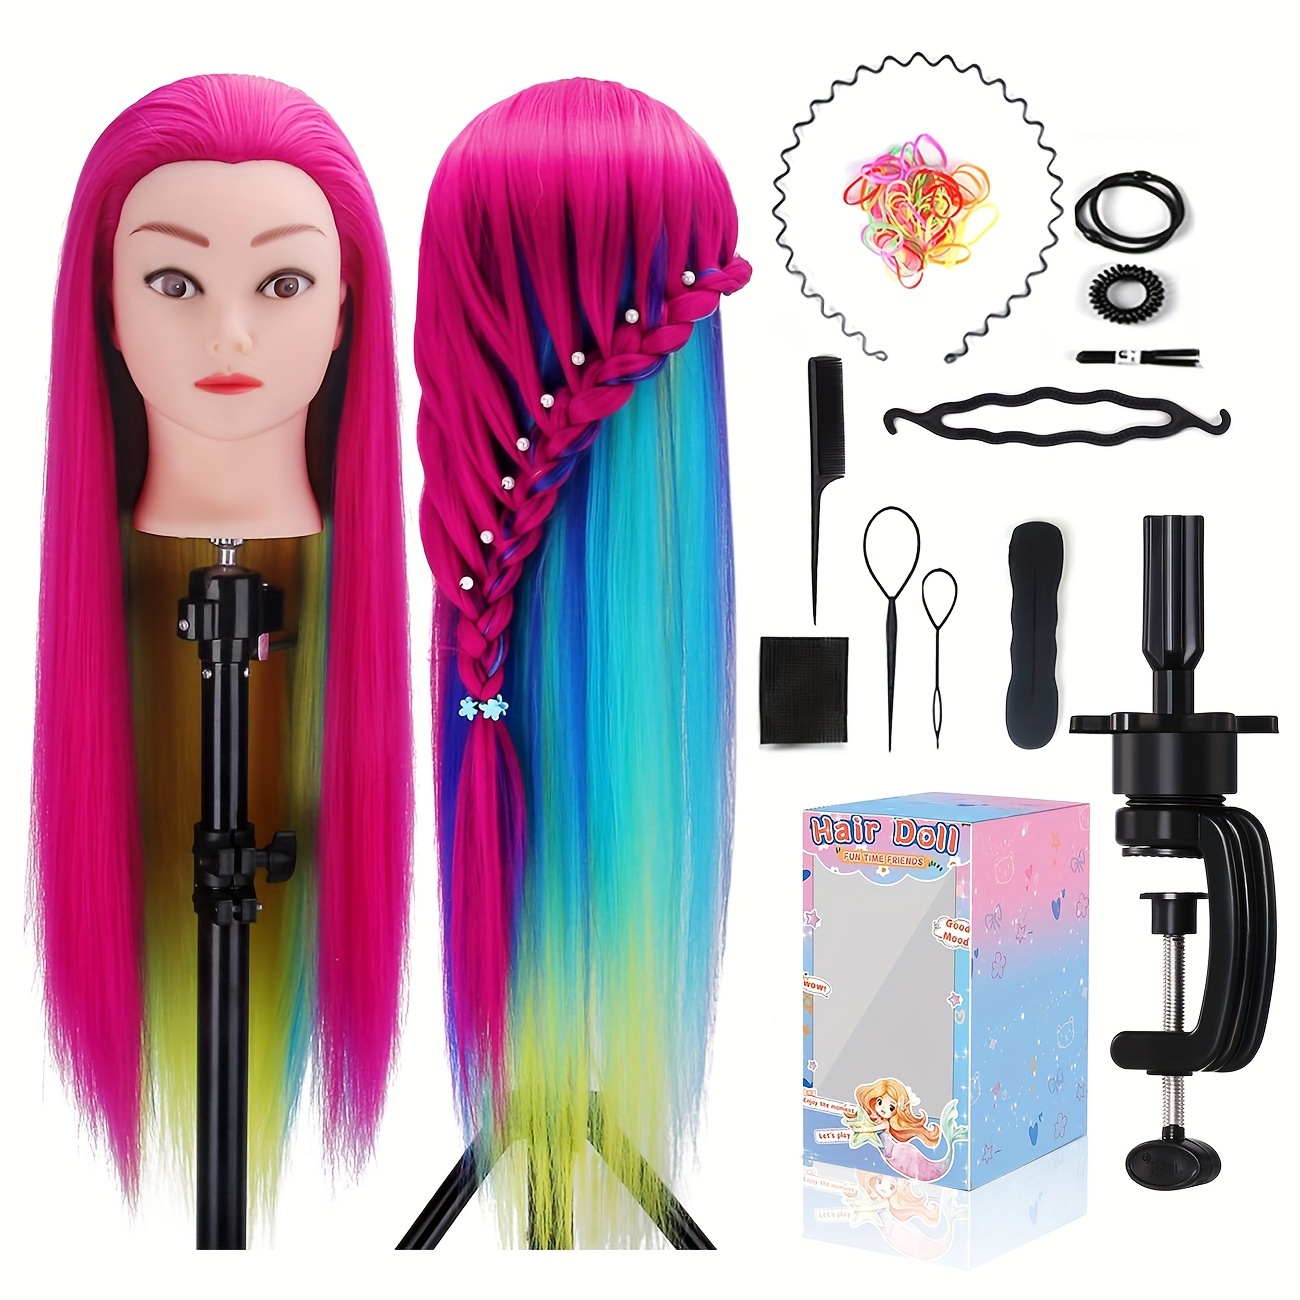 

Training Head, 29 Inches Colorful Hair Mannequin Manikin Head Cosmetology Doll Head Practice Styling Hairdressing Training Braiding Heads With Clamp Holder And Tool Set